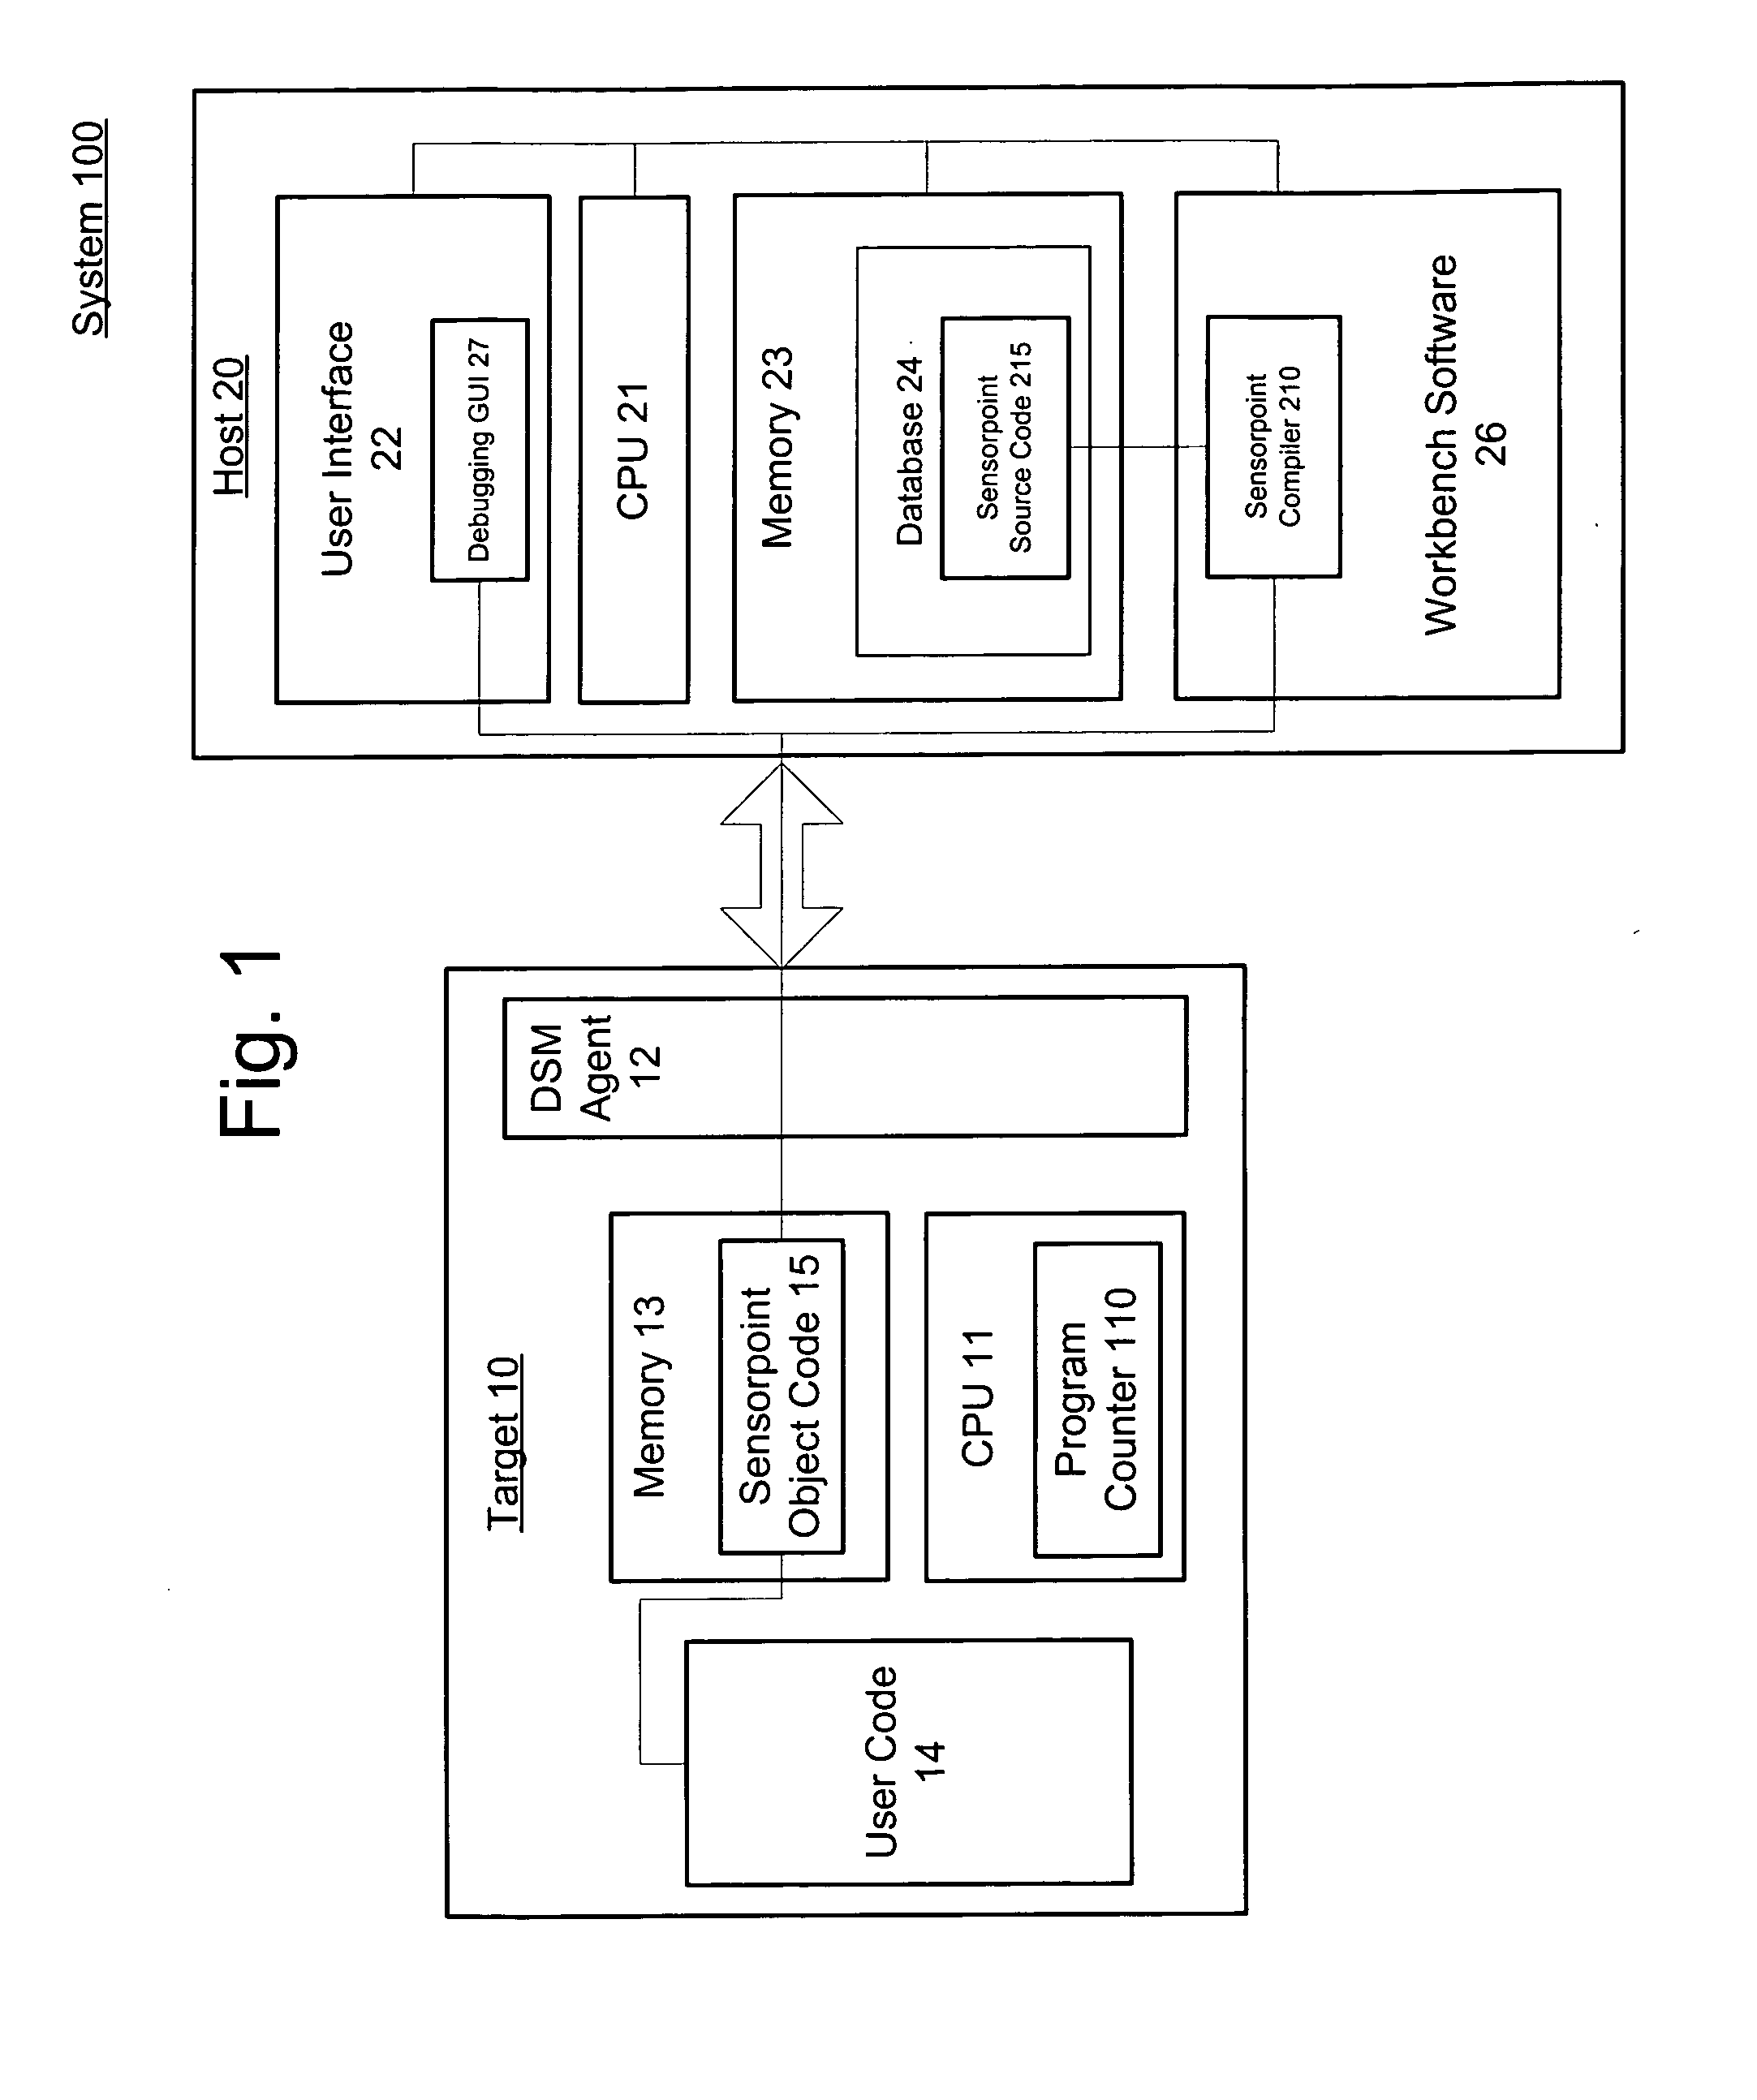 Method and system for dynamic debugging of software